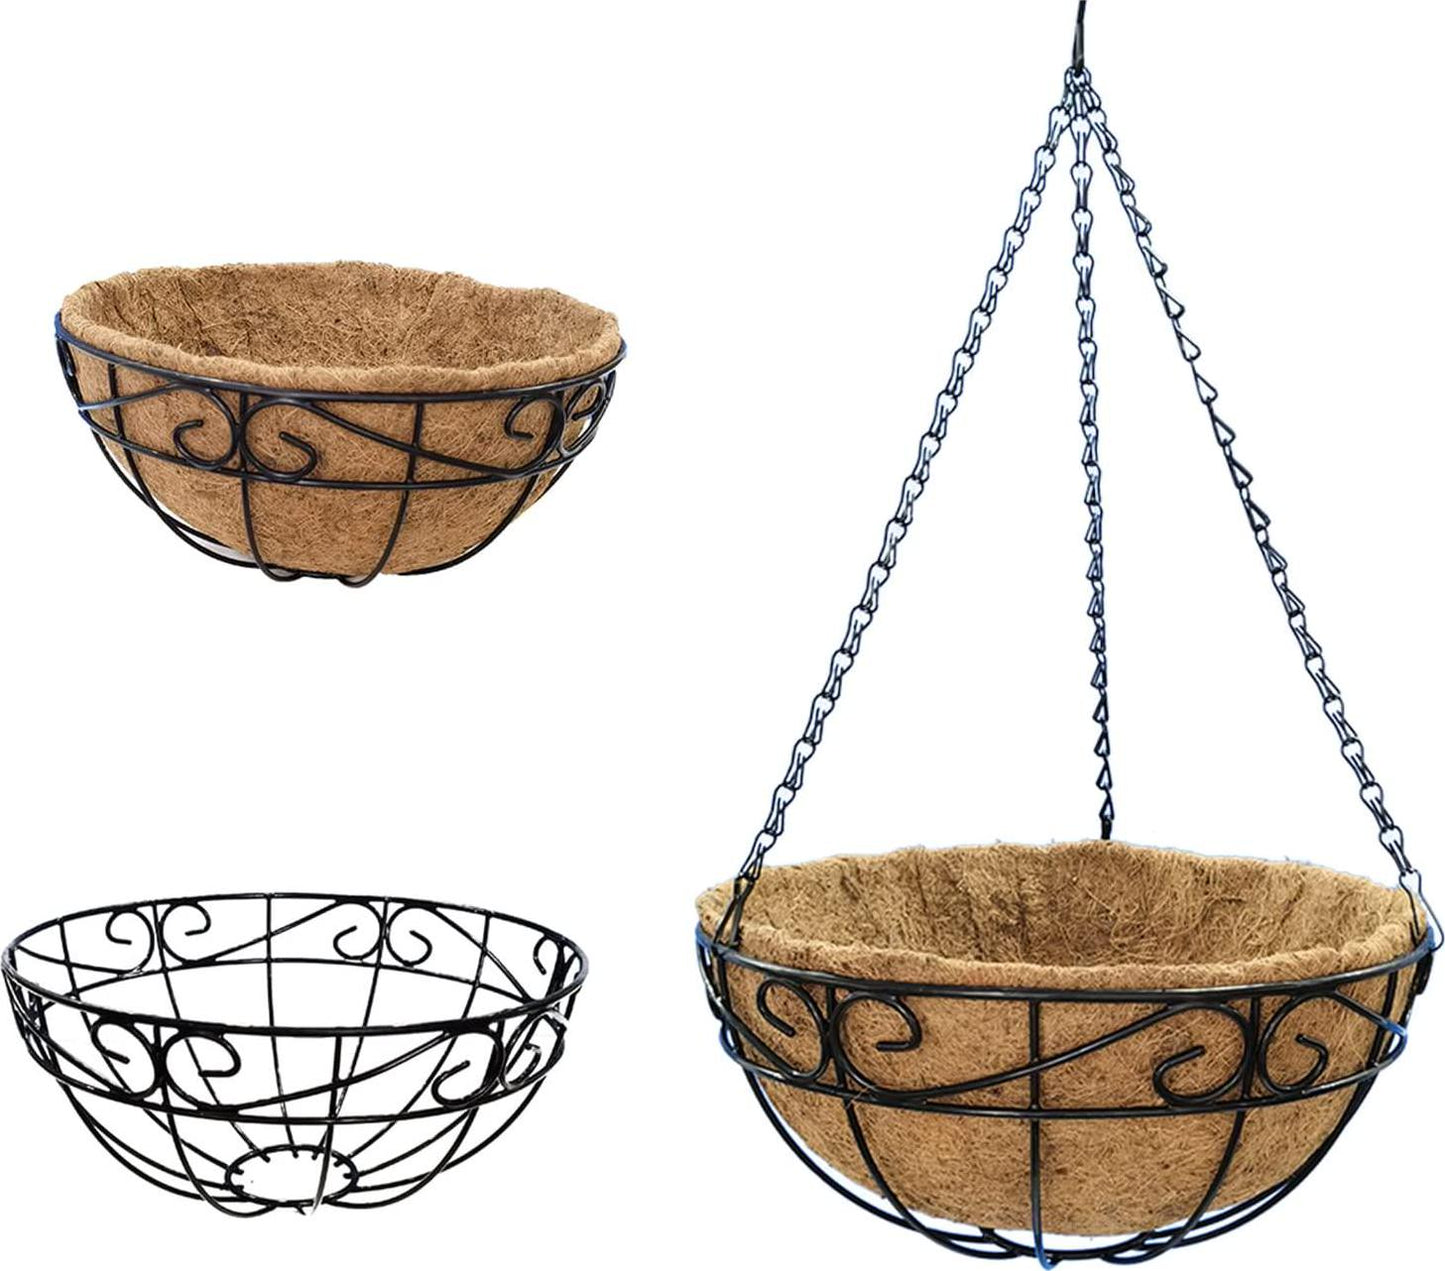 10 inch Metal Hanging Baskets For Plants Outdoor 4 Pack Round Metal Wire Hanging Basket Planter with Coco Fiber Liners Chain Round Wire Plant Holder for Garden, Patio, Deck, Porch Plants Flower Potsss